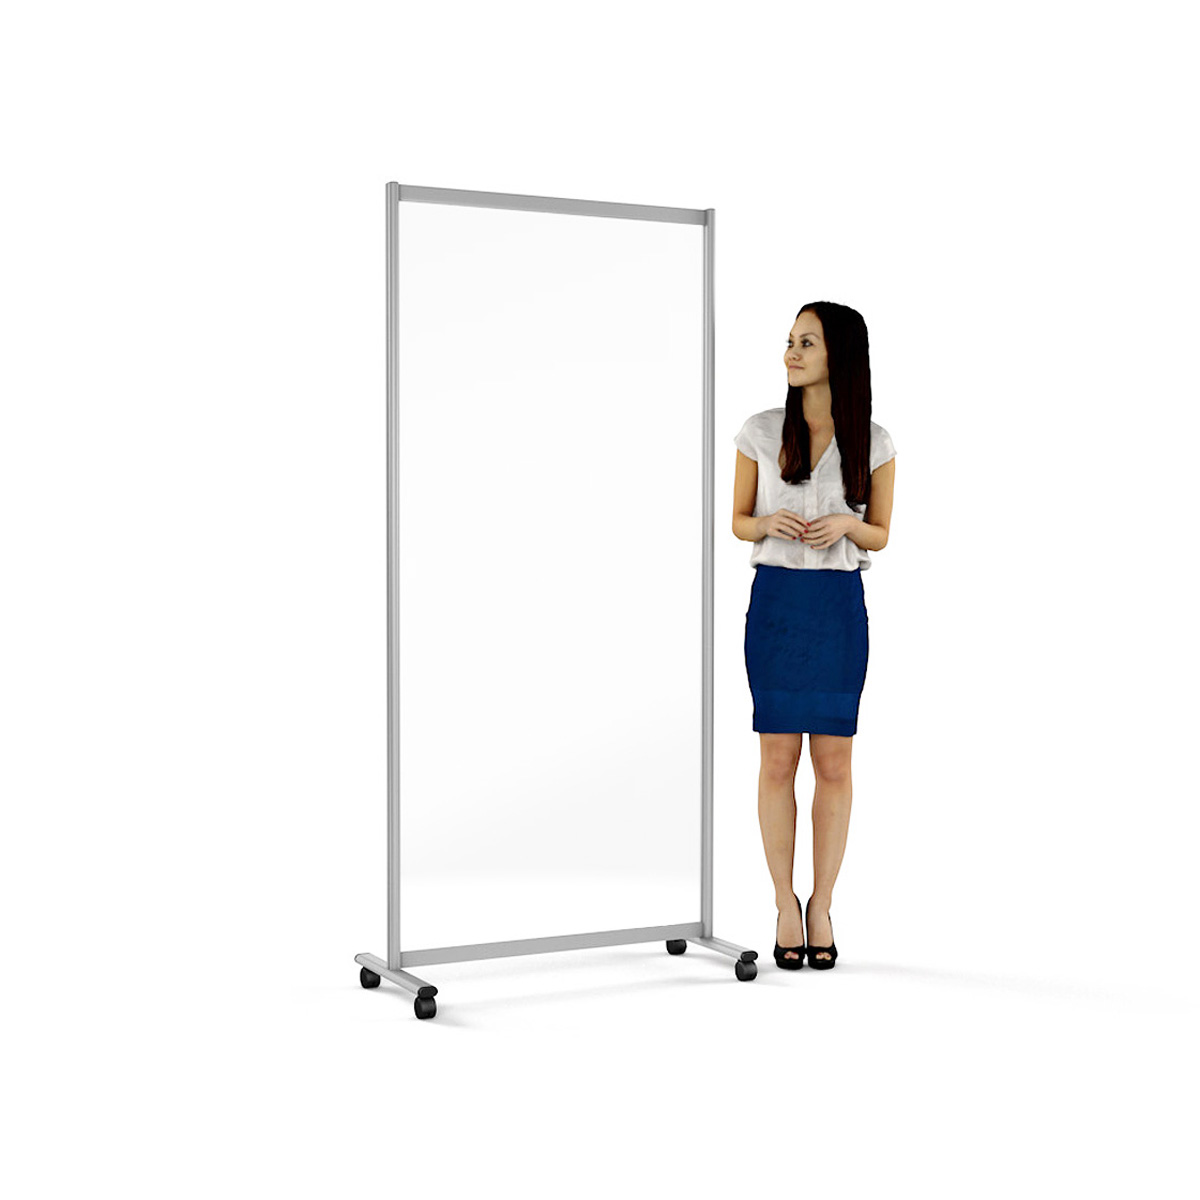 Privacy Room Divider Screens on Wheels Stands 2000m (h) x 900mm (w)